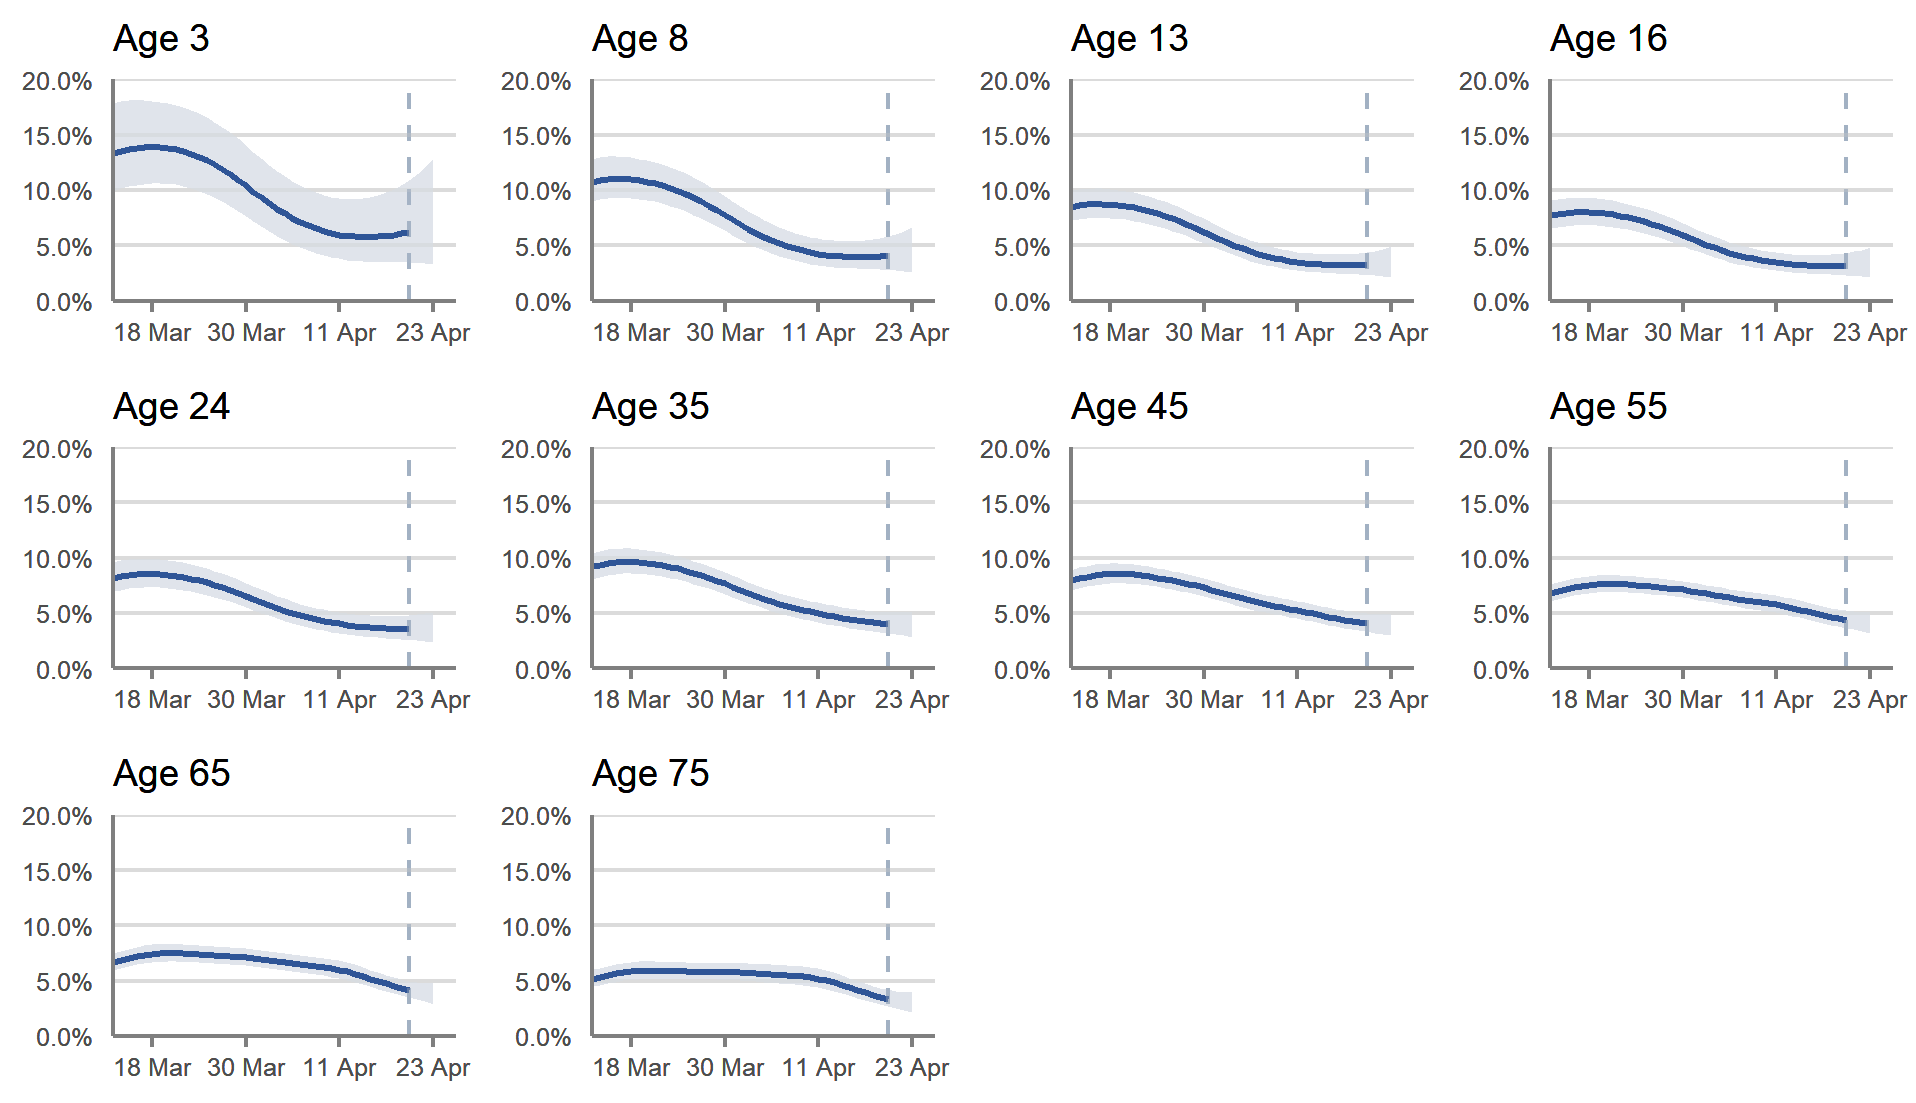 In Scotland, the estimated percentage of people testing positive has decreased among older adults. However, the trend was uncertain in young adults and children.